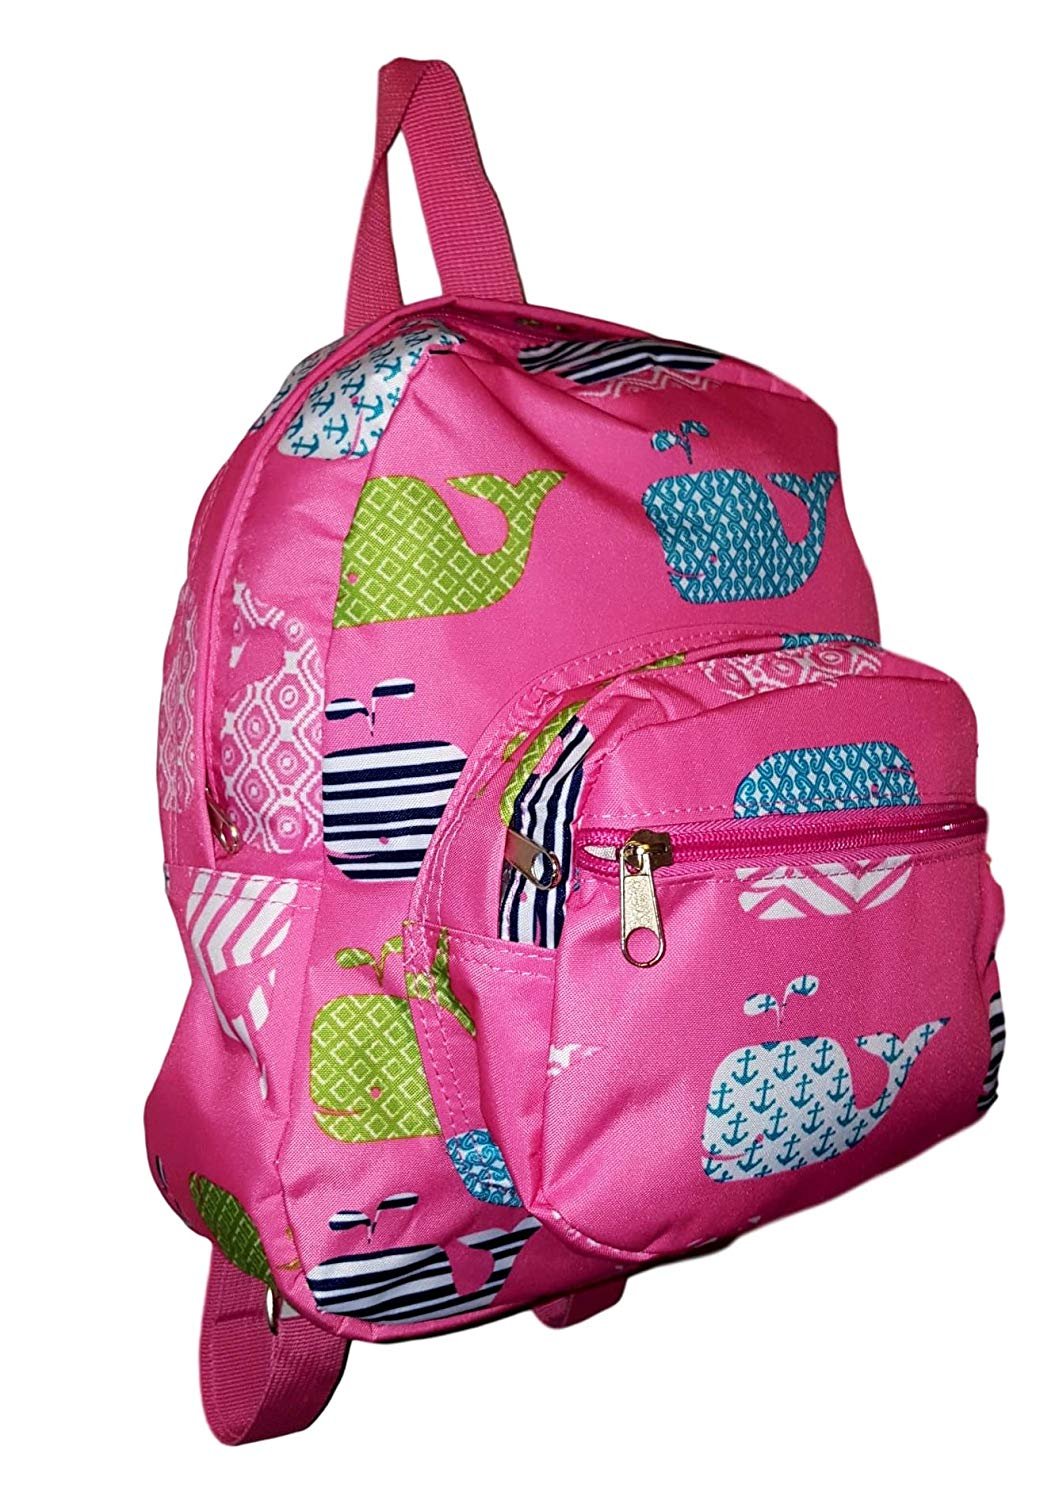 11-inch Mini Backpack Purse, Zipper Front Pockets Teen Child Pink Whale print - image 1 of 3